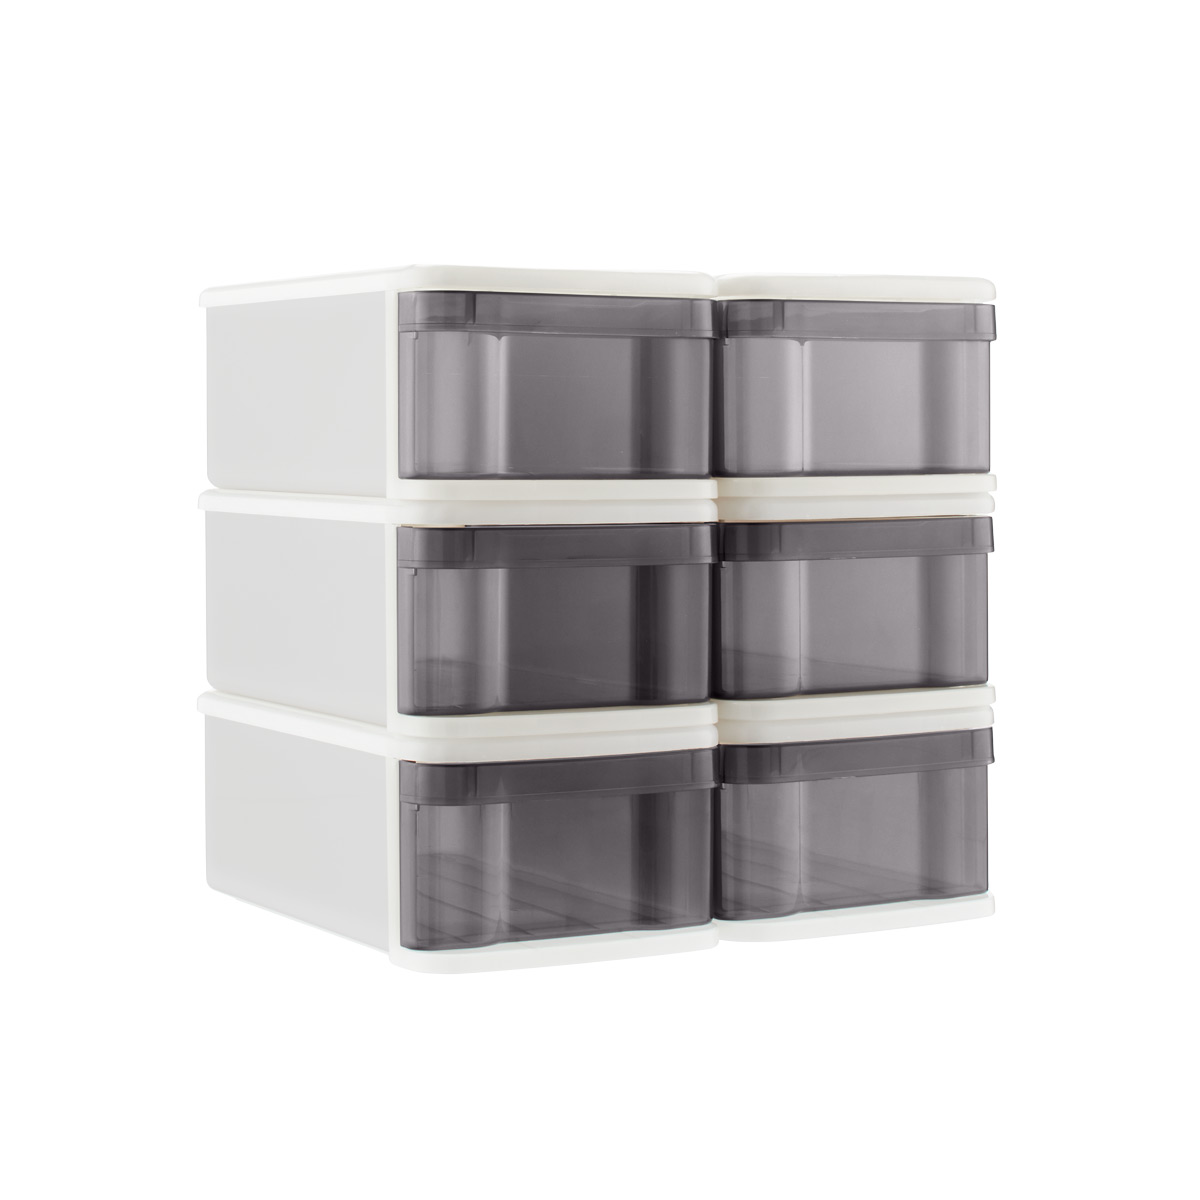 https://images.containerstore.com/catalogimages?sku=10074952